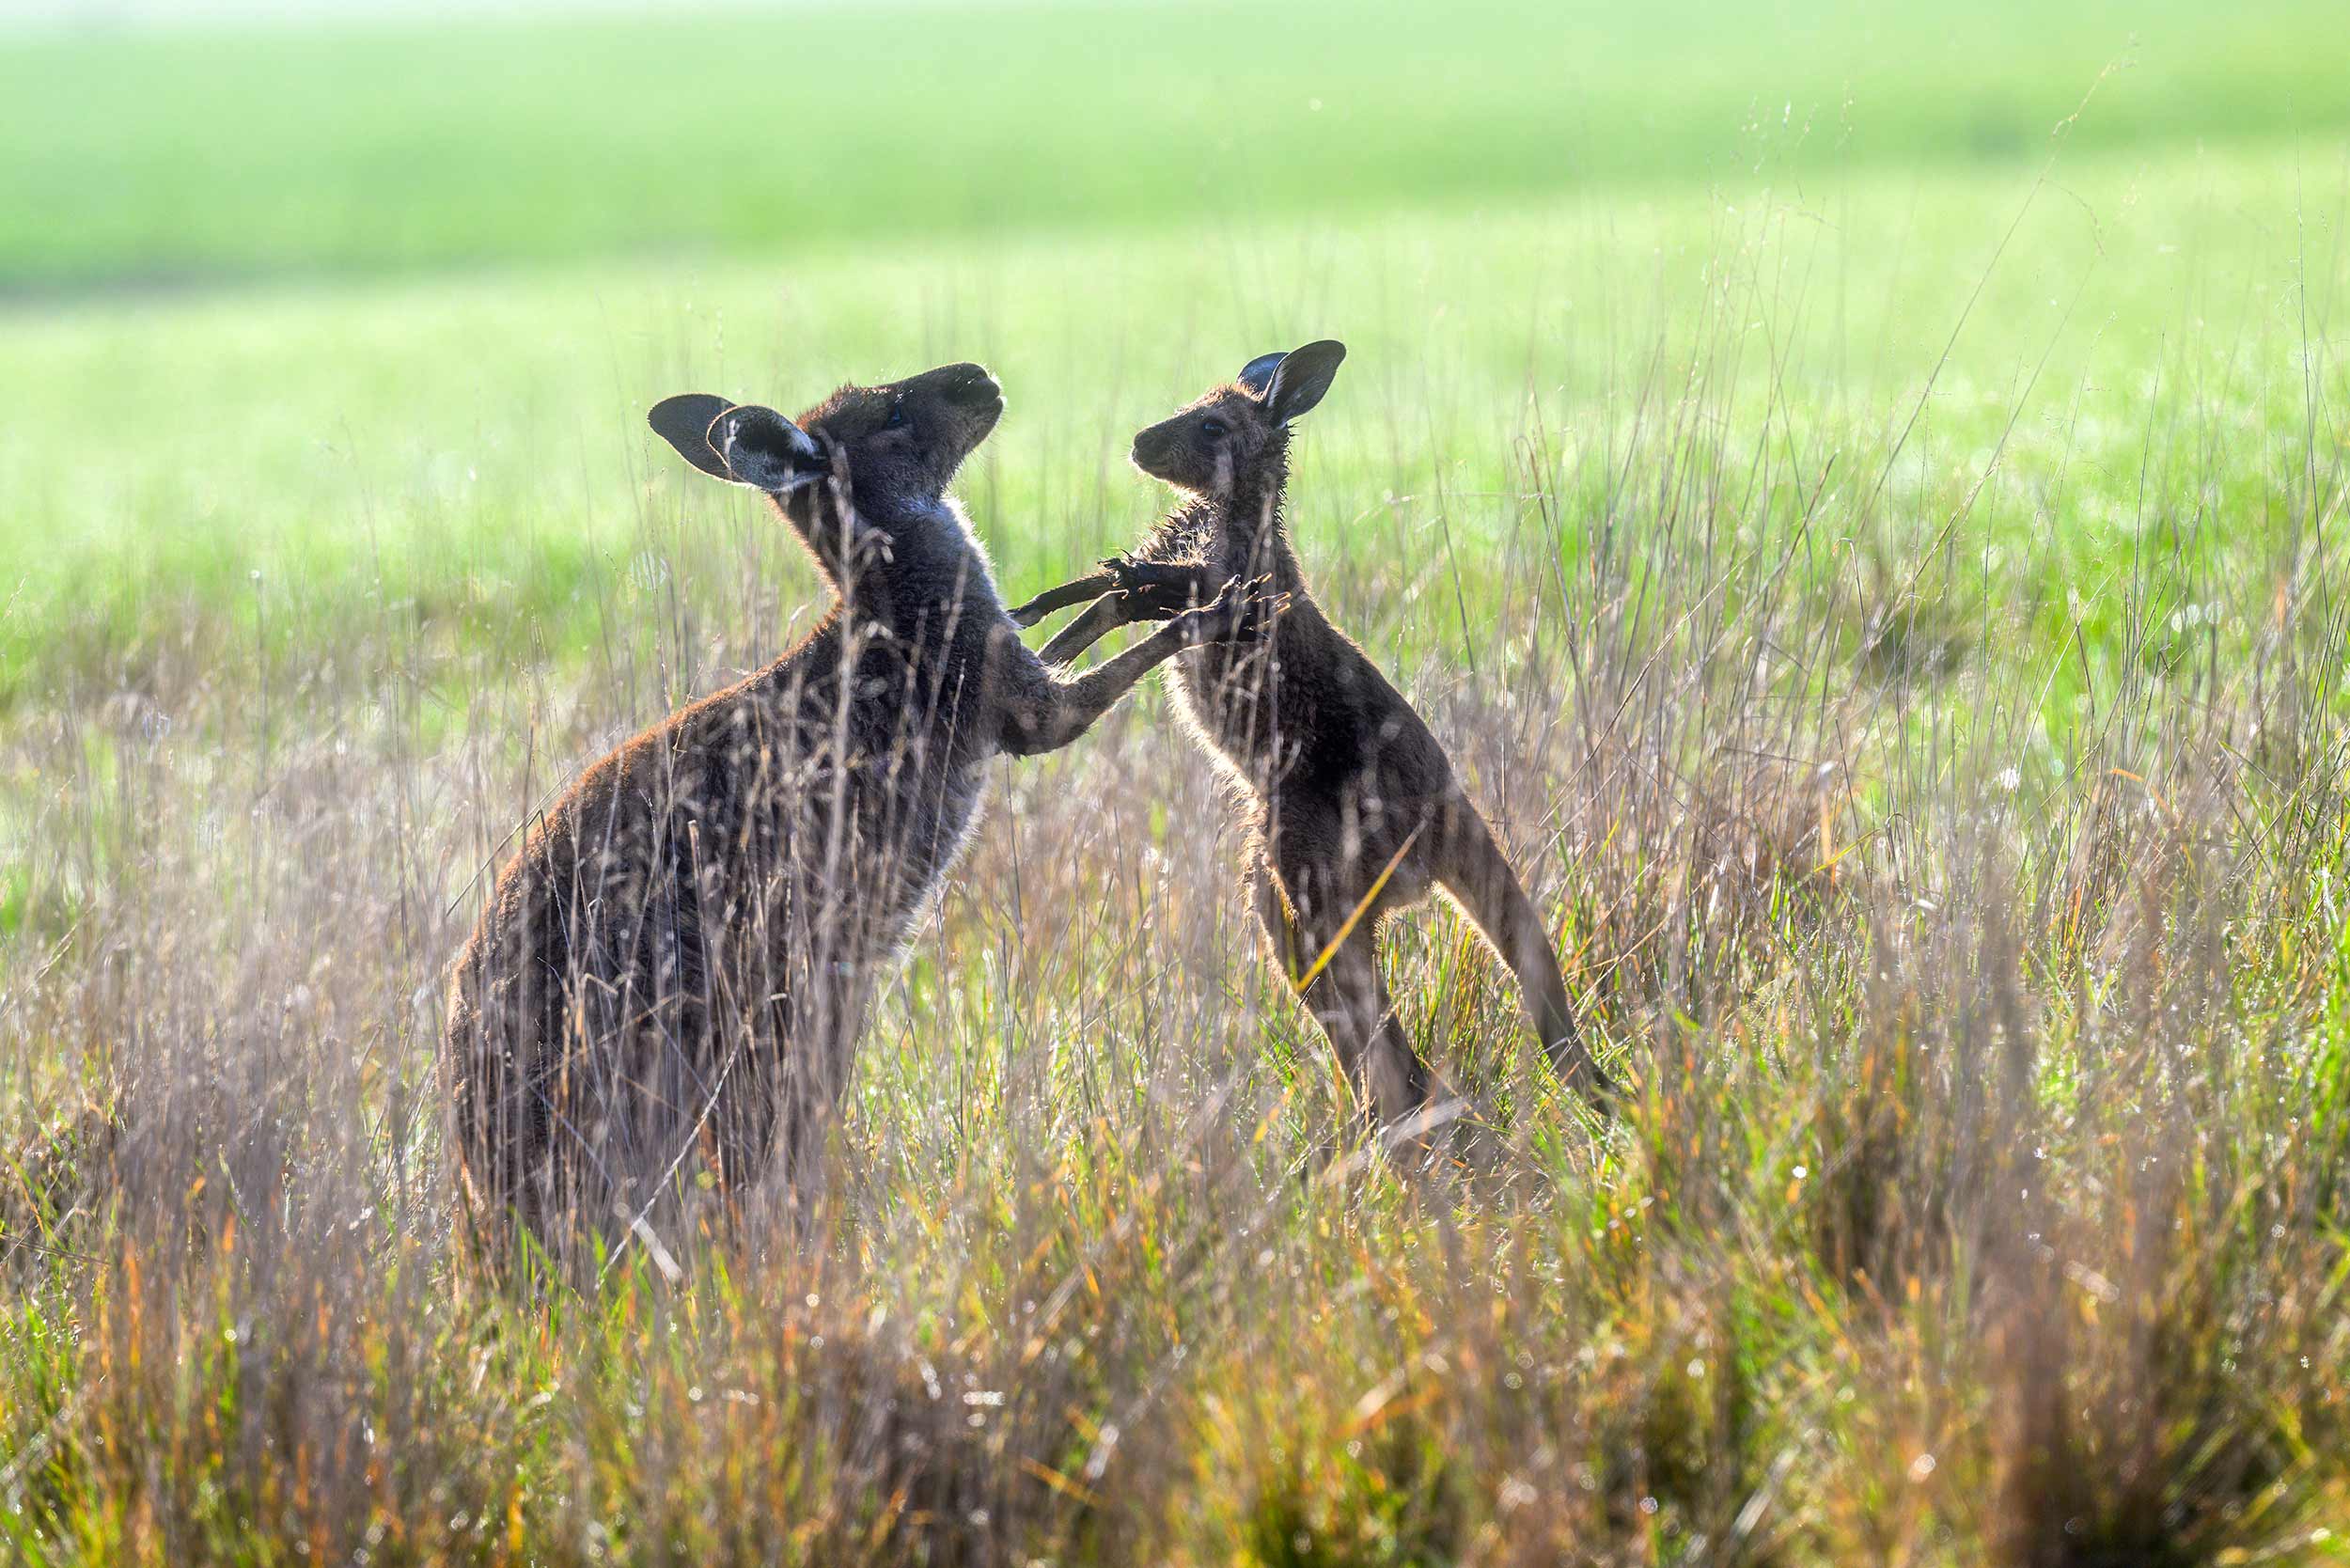 A mother and her young Joey sharing a loving tender moment together